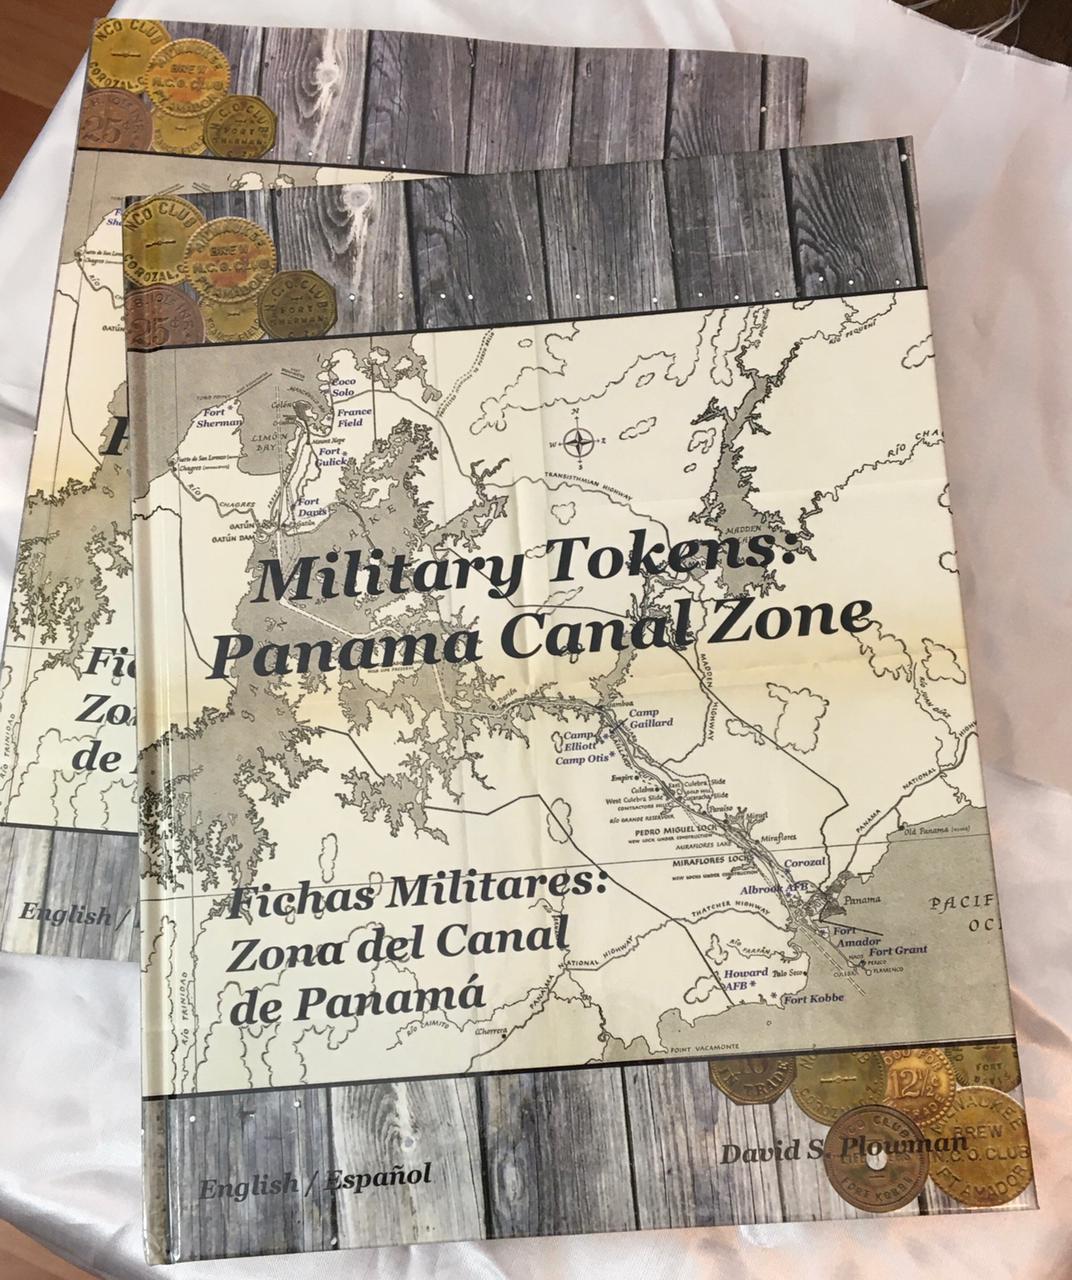 military-tokens-canal-zone-fichas-militares-zona-del-canal-de-panama-